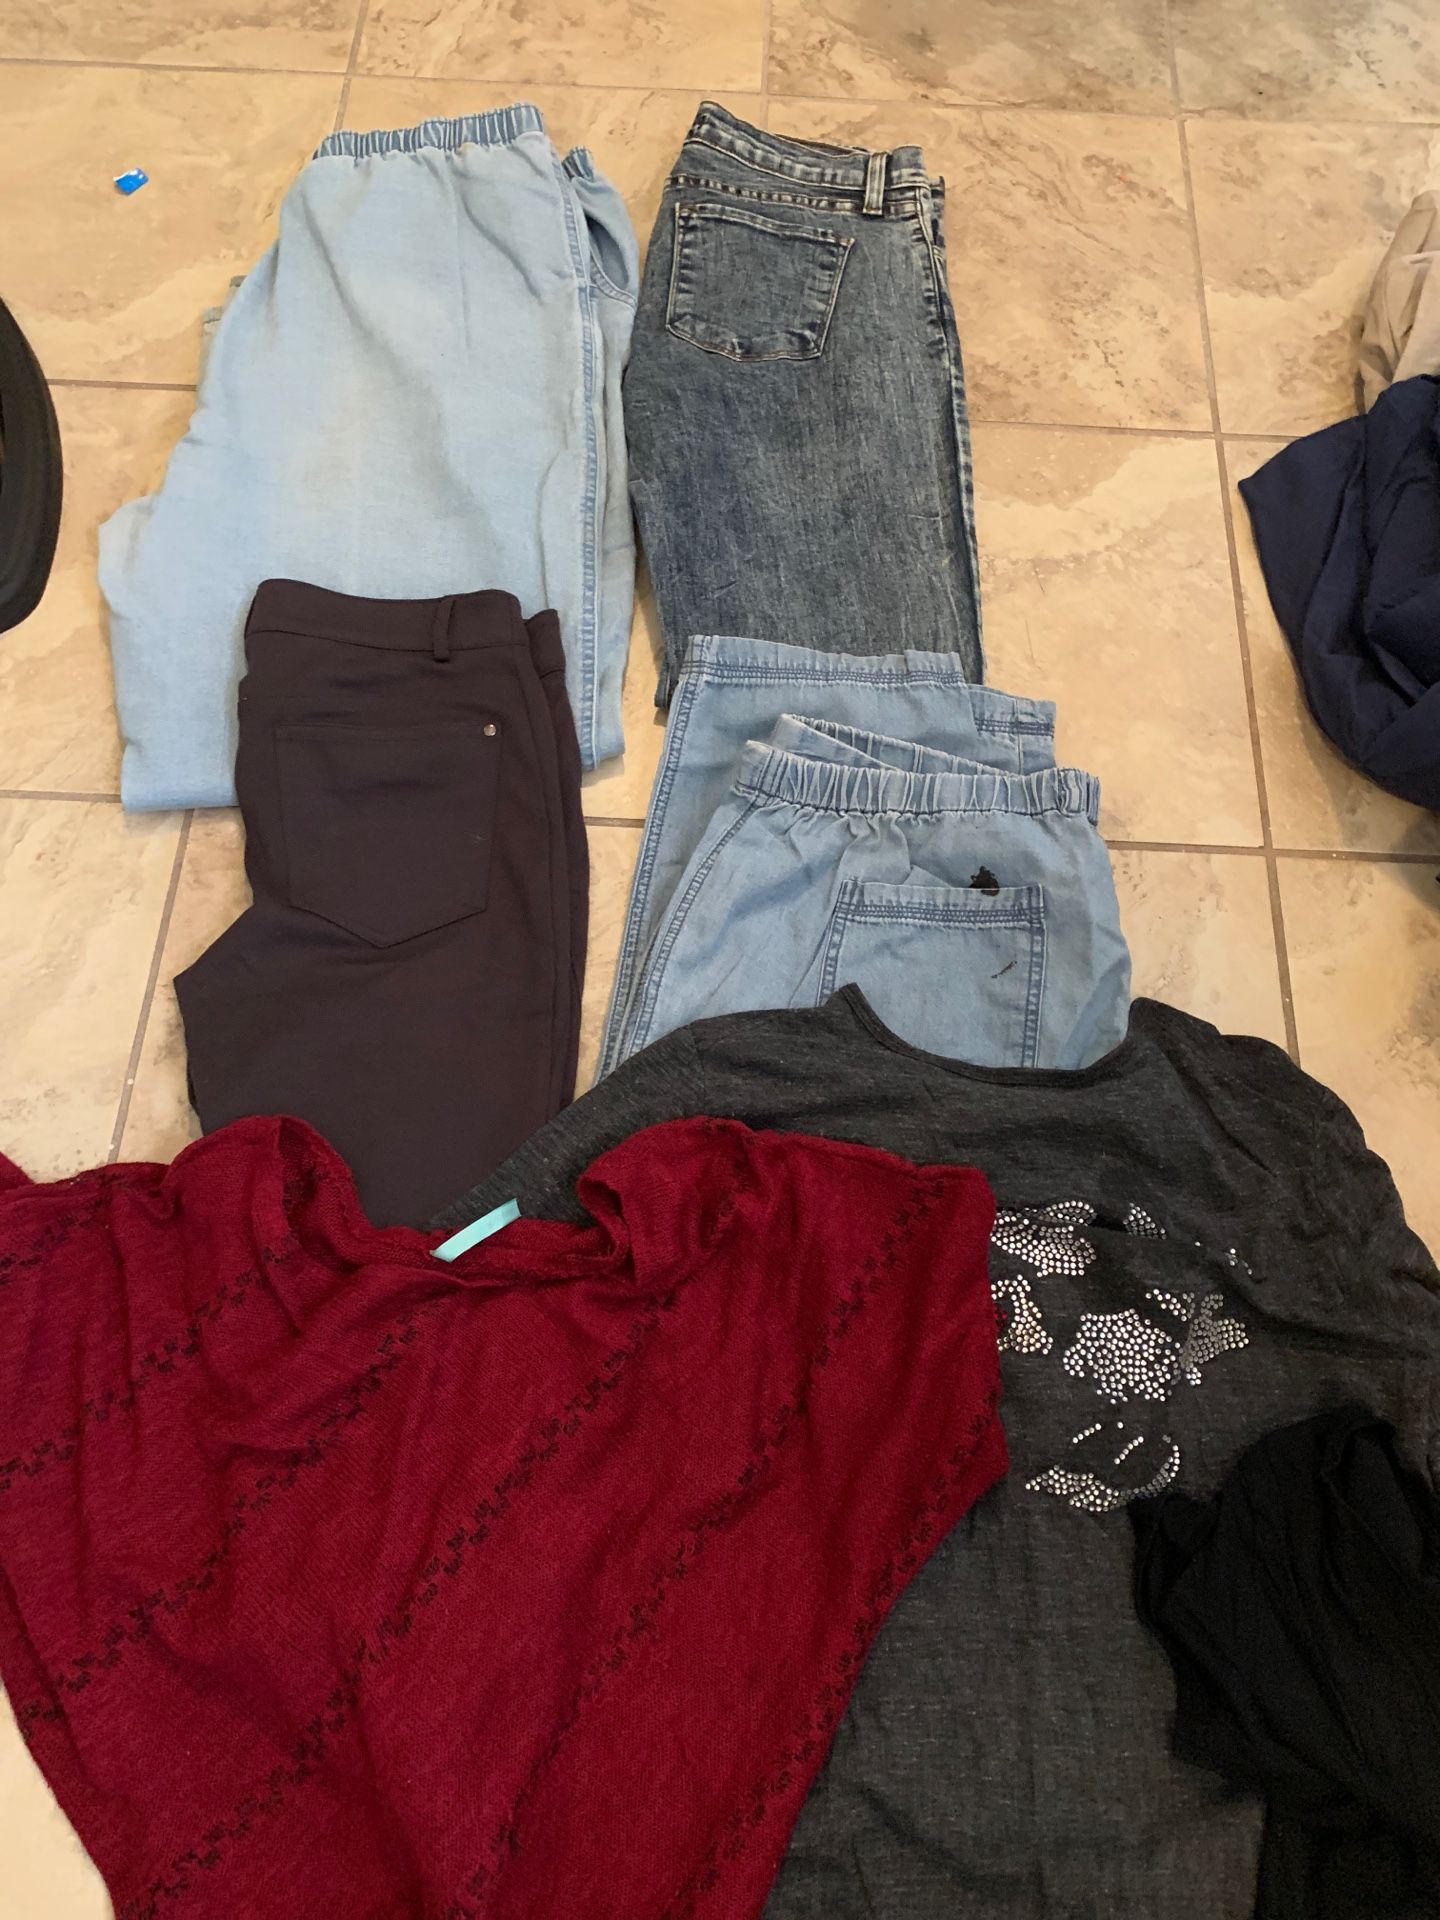 Brand new jeans from forever 21 bras etc free